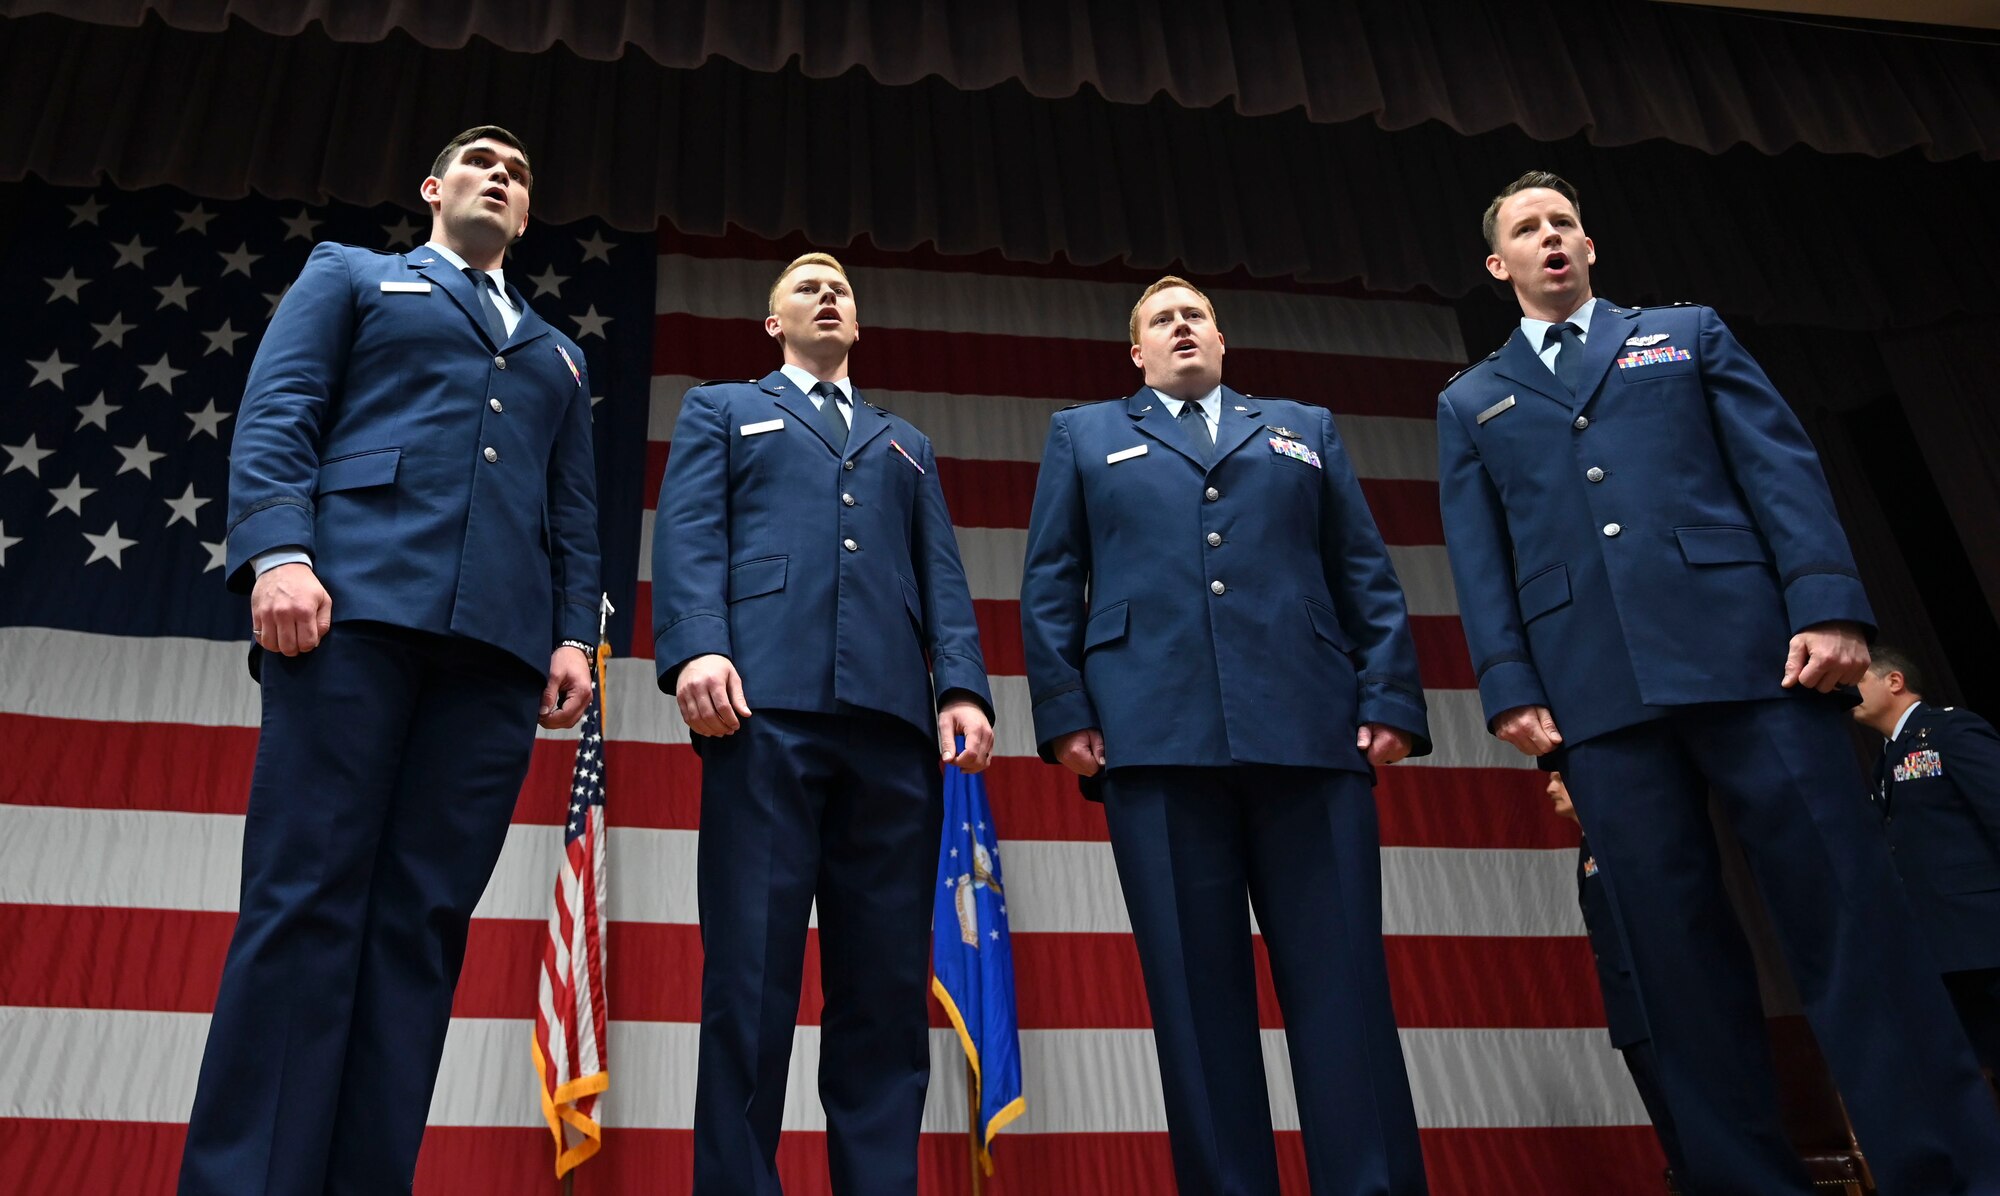 A choir comprised of two instructor pilots and two student pilots assigned to the 14th Flying Training Wing, preform the National Anthem during a change of command ceremony, June 21, 2021, on Columbus Air Force Base, Miss. The mission of the 14th Student Squadron is to ensure student pilots have everything they need to become both officers and pilots while providing unrivaled academic and simulator training. (U.S. Air Force photo by Airman 1st Class Jessica Haynie)